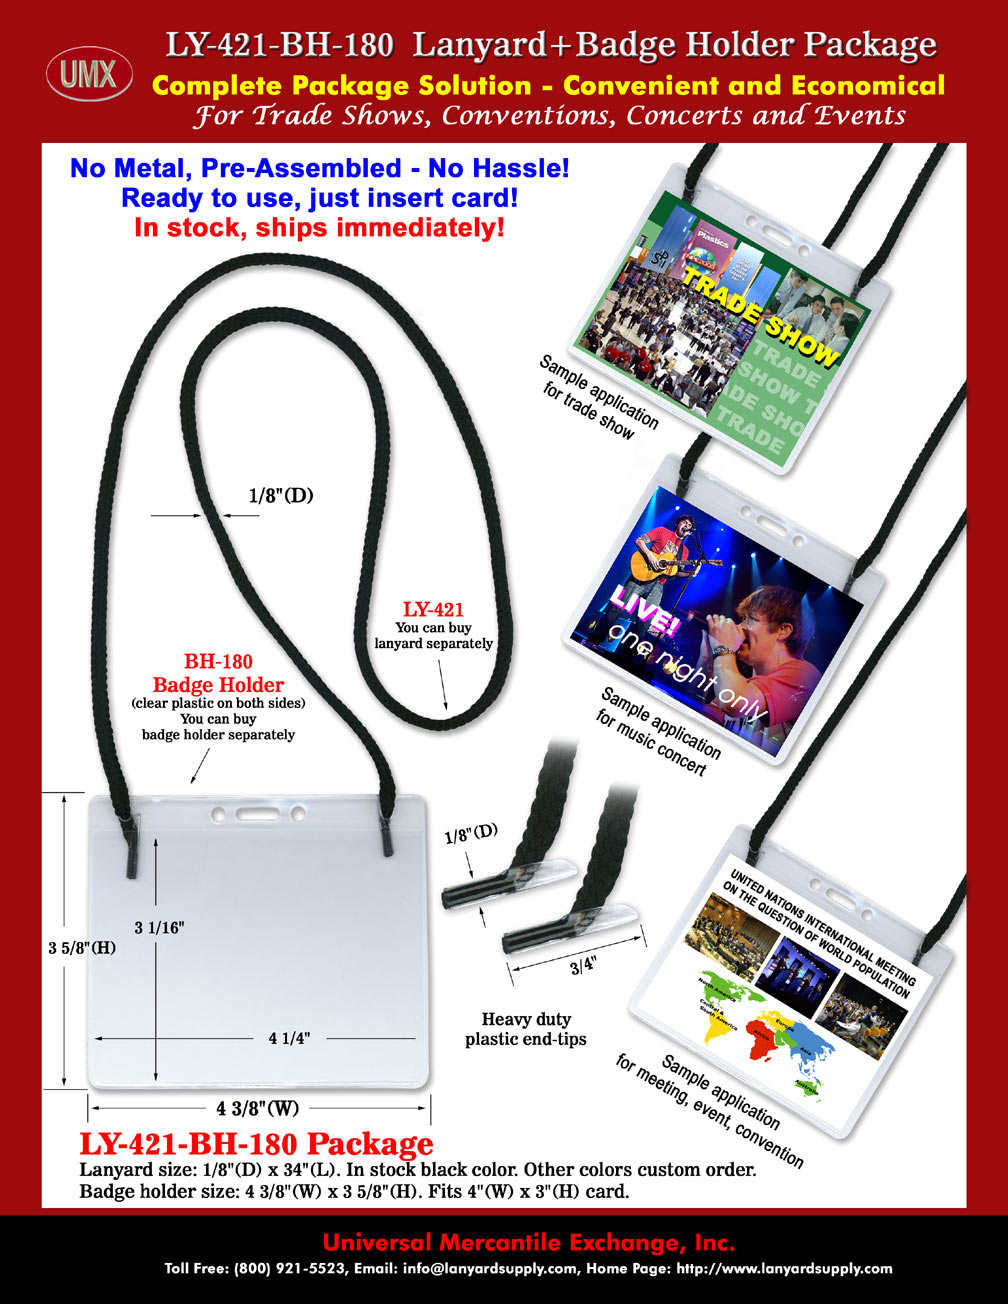 No-Metal, No-Hassle, Fast Dispatch: Special Event Lanyard + Badge Holder Package